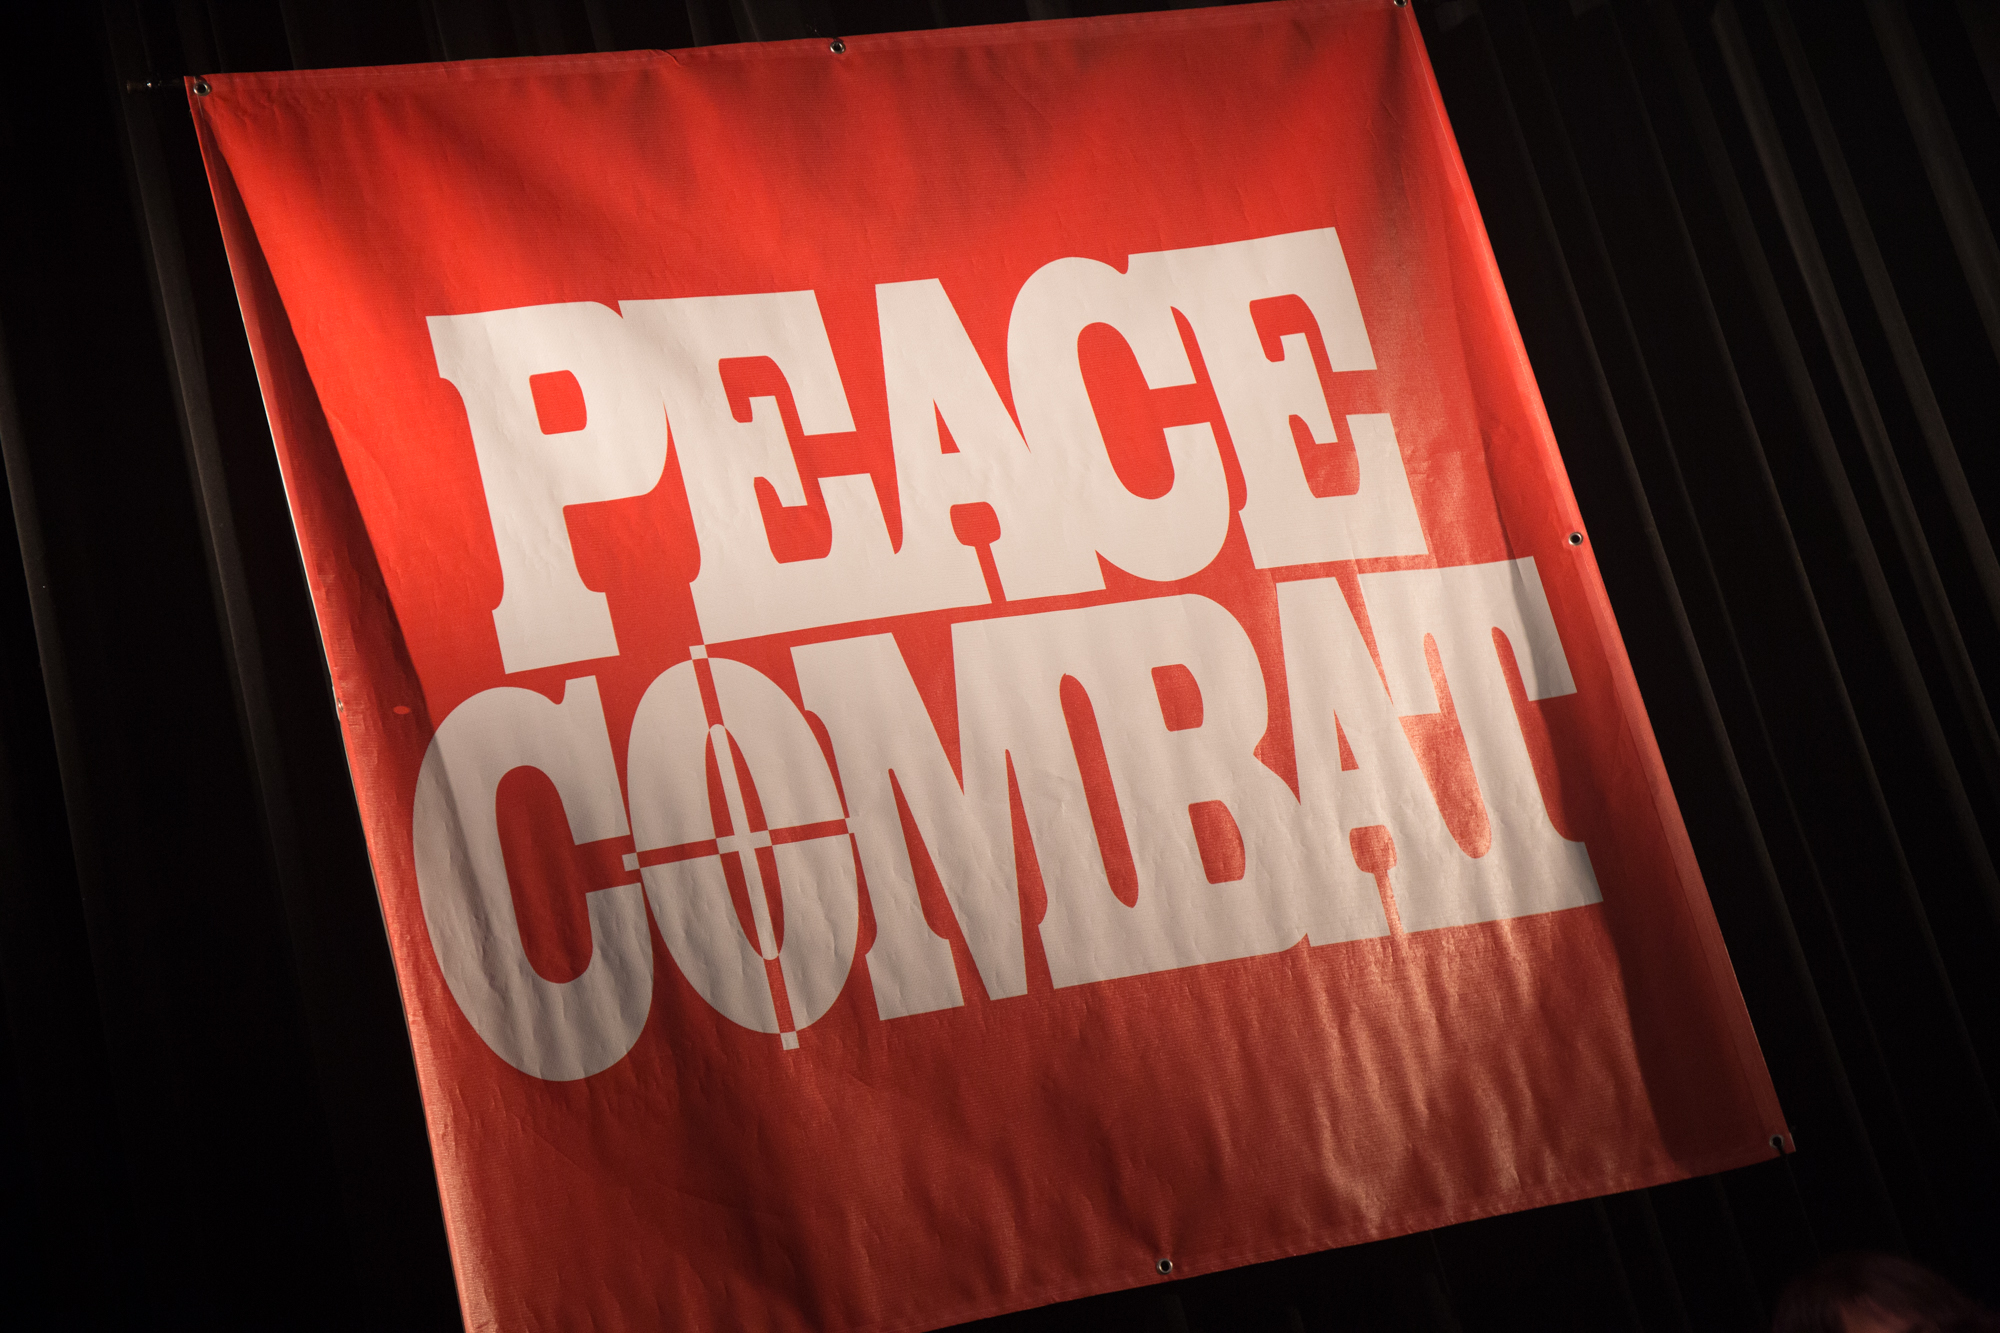 PEACE COMBAT FES COSTA IN JAPAN 2015 BBOY 3ON3 BATTLE レポート！！